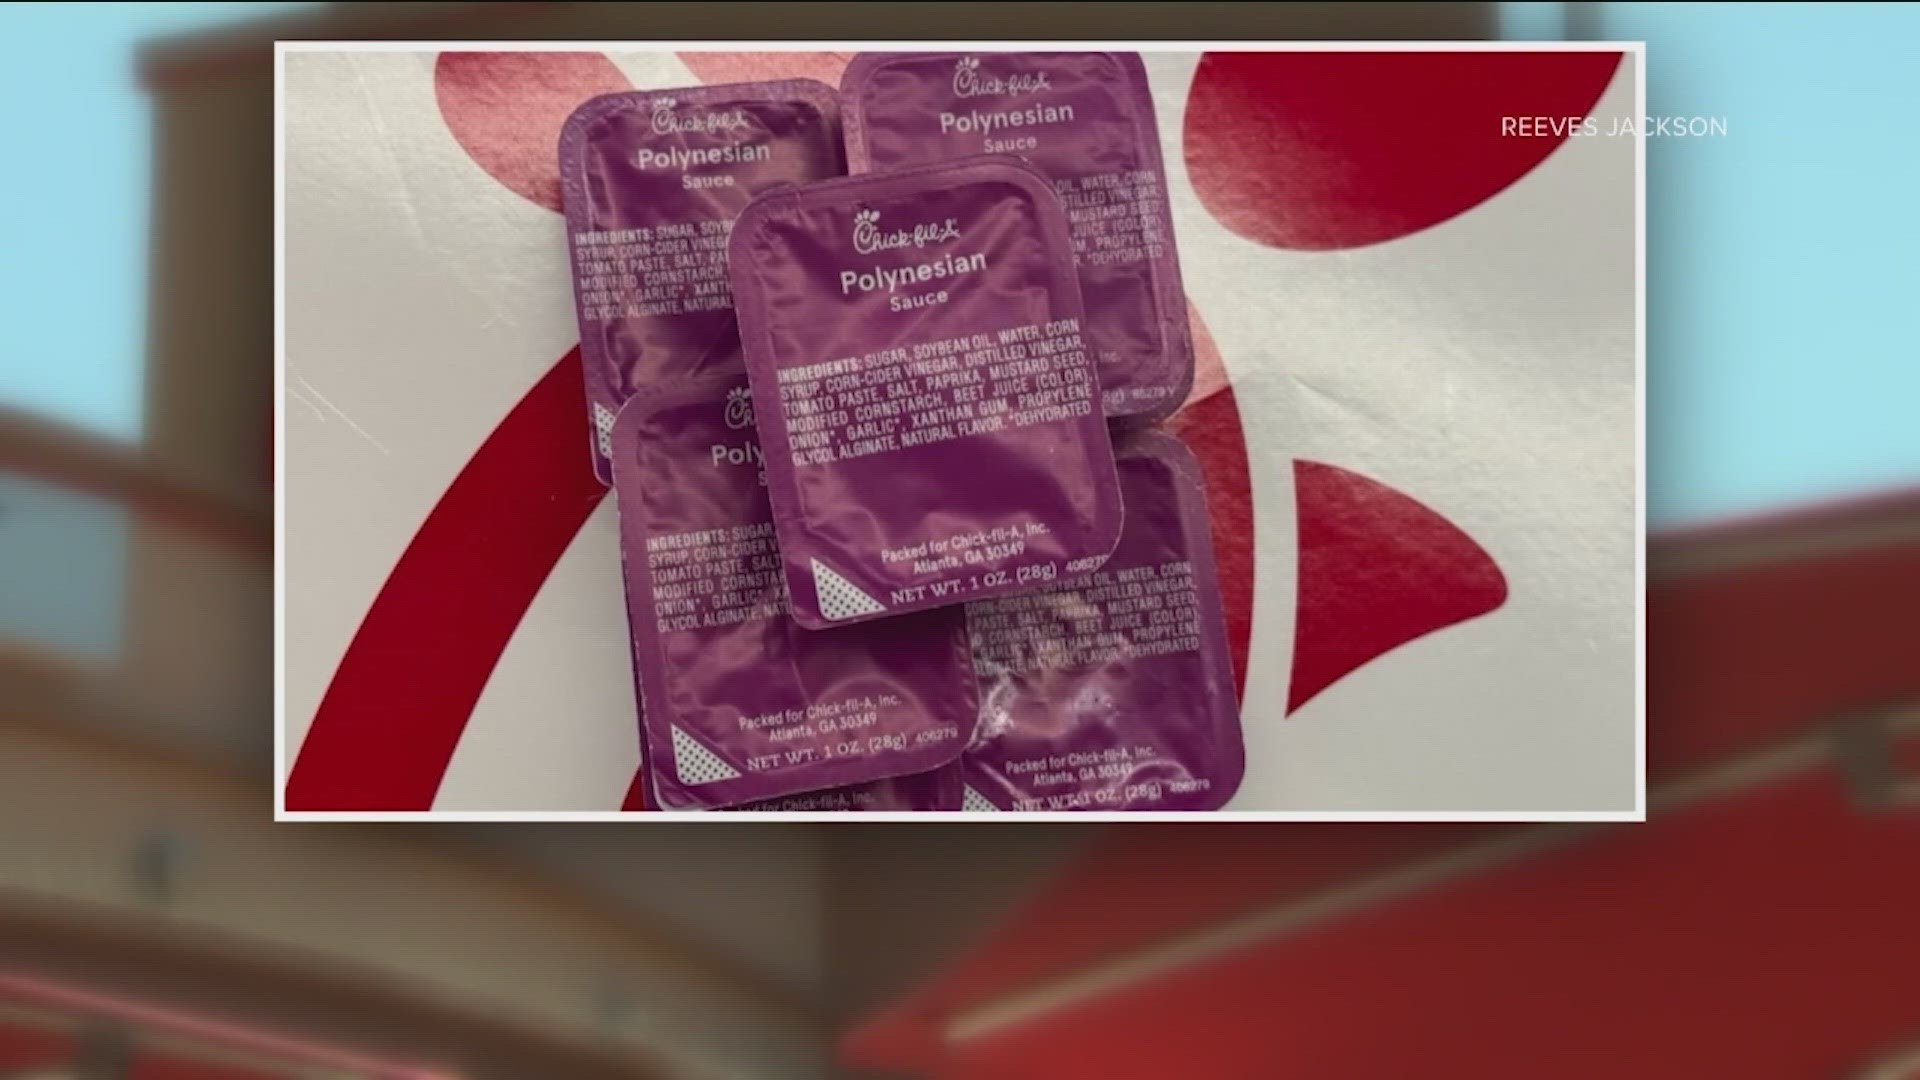 Chick-fil-A has issued a recall for its Polynesian Sauce dipping cups due to allergy concerns.